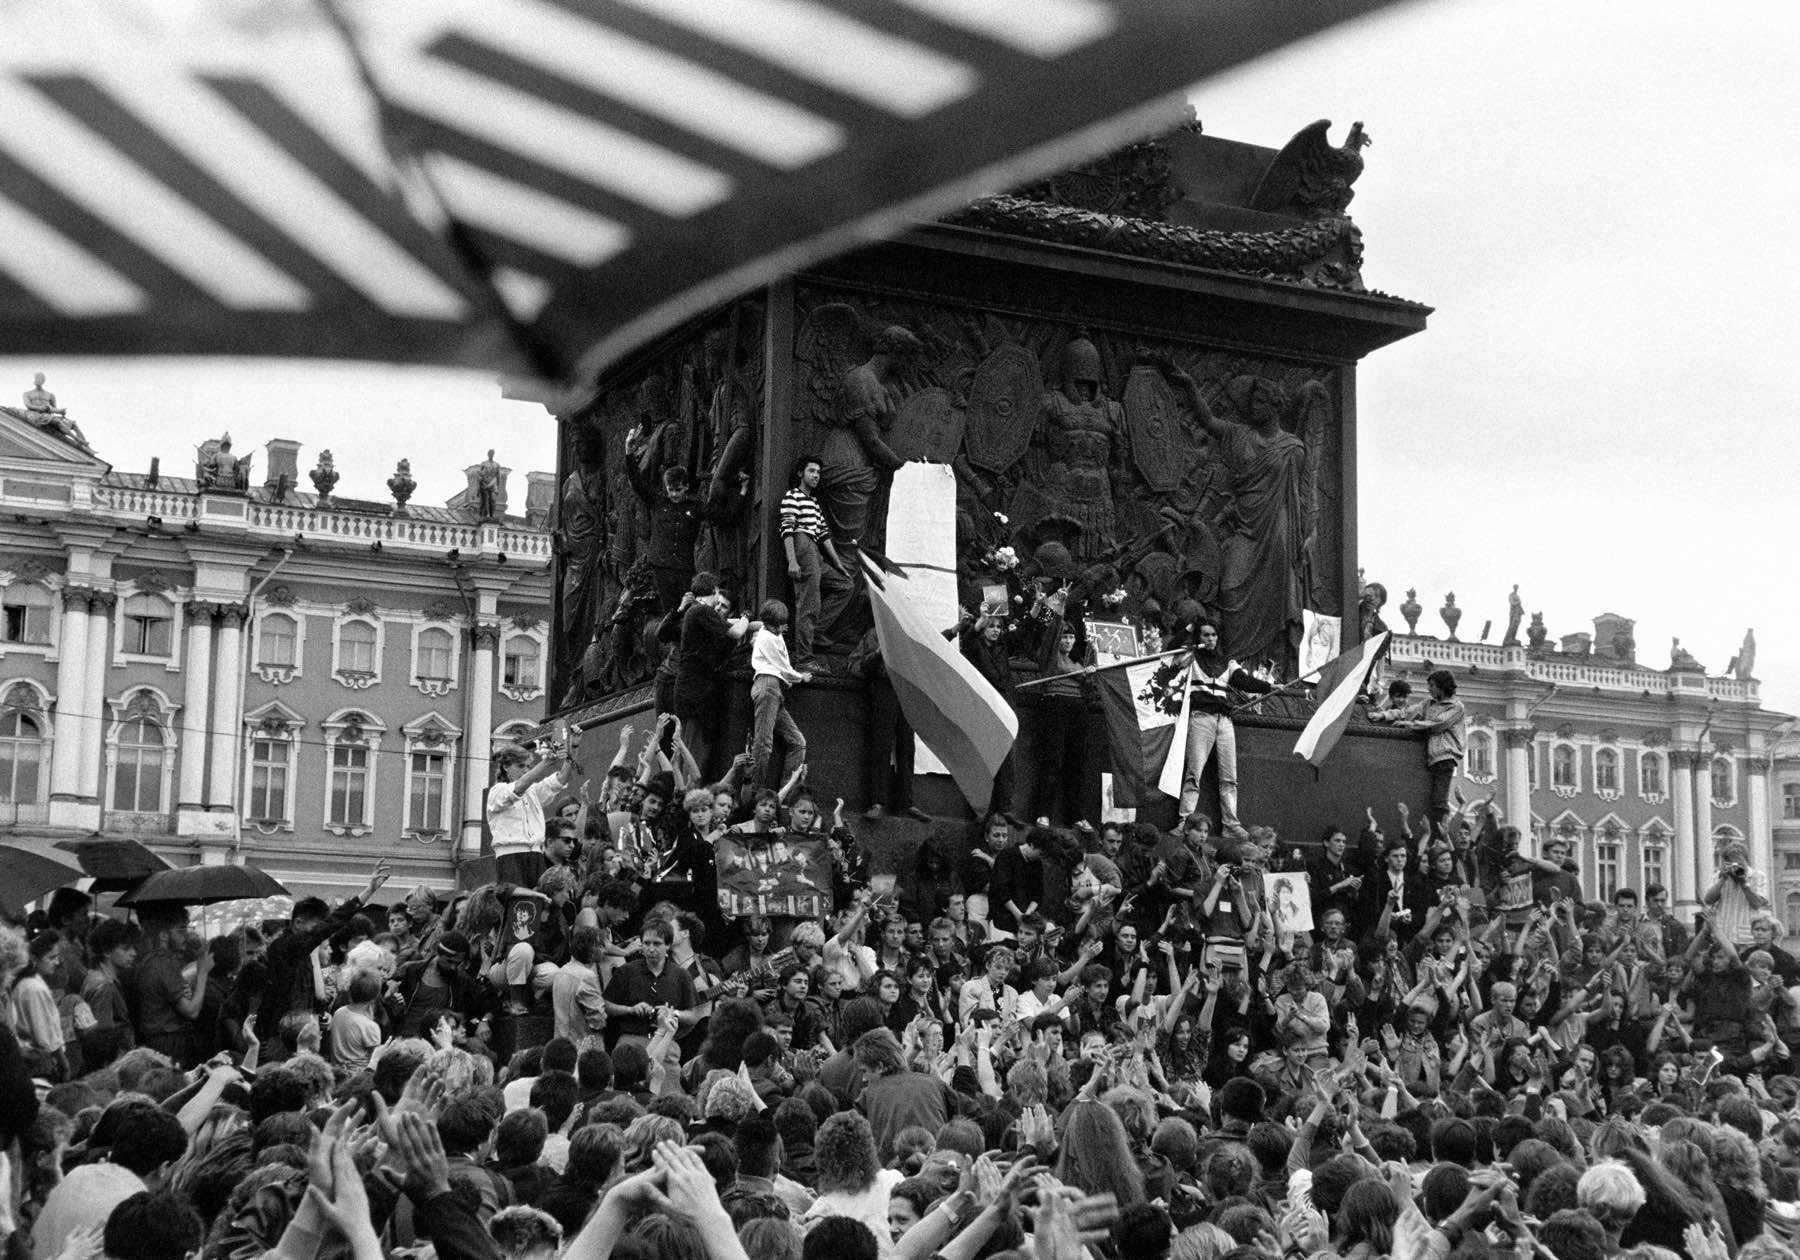 St Petersburg, 1990-1991. Rally in front of the Winter Palace